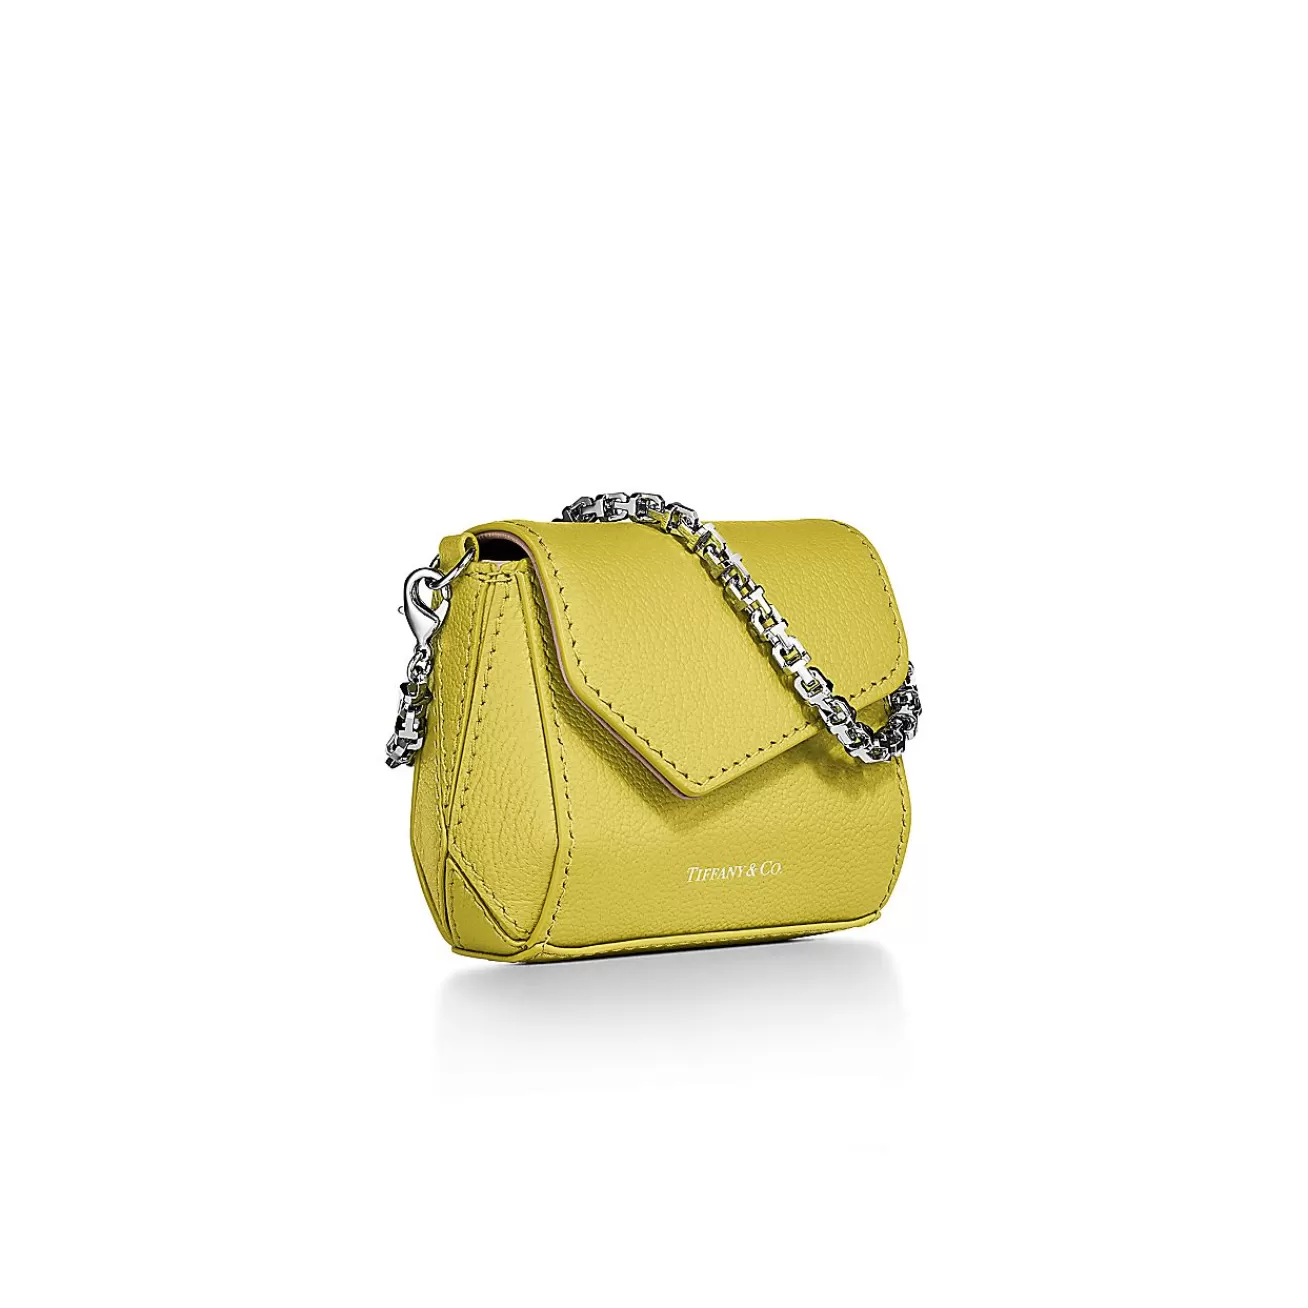 Tiffany & Co. Tiffany T Nano Bag in Citrine Yellow Leather | ^Women Small Leather Goods | Women's Accessories